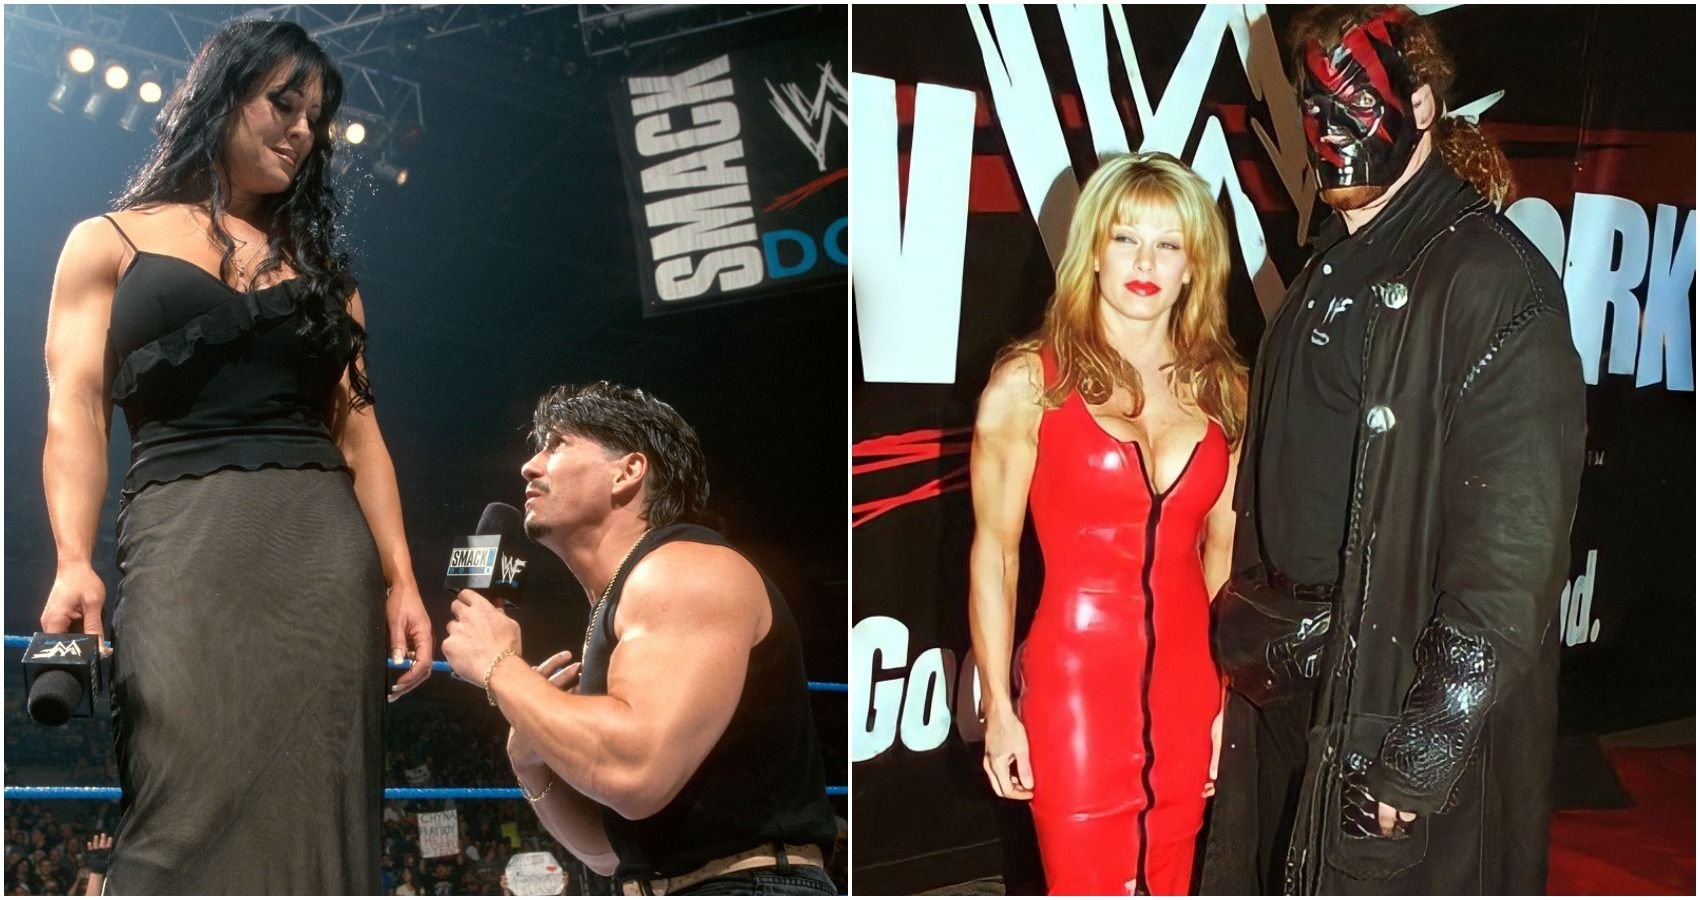 Every Romantic Angle Of The Attitude Era, Ranked From Worst To Best